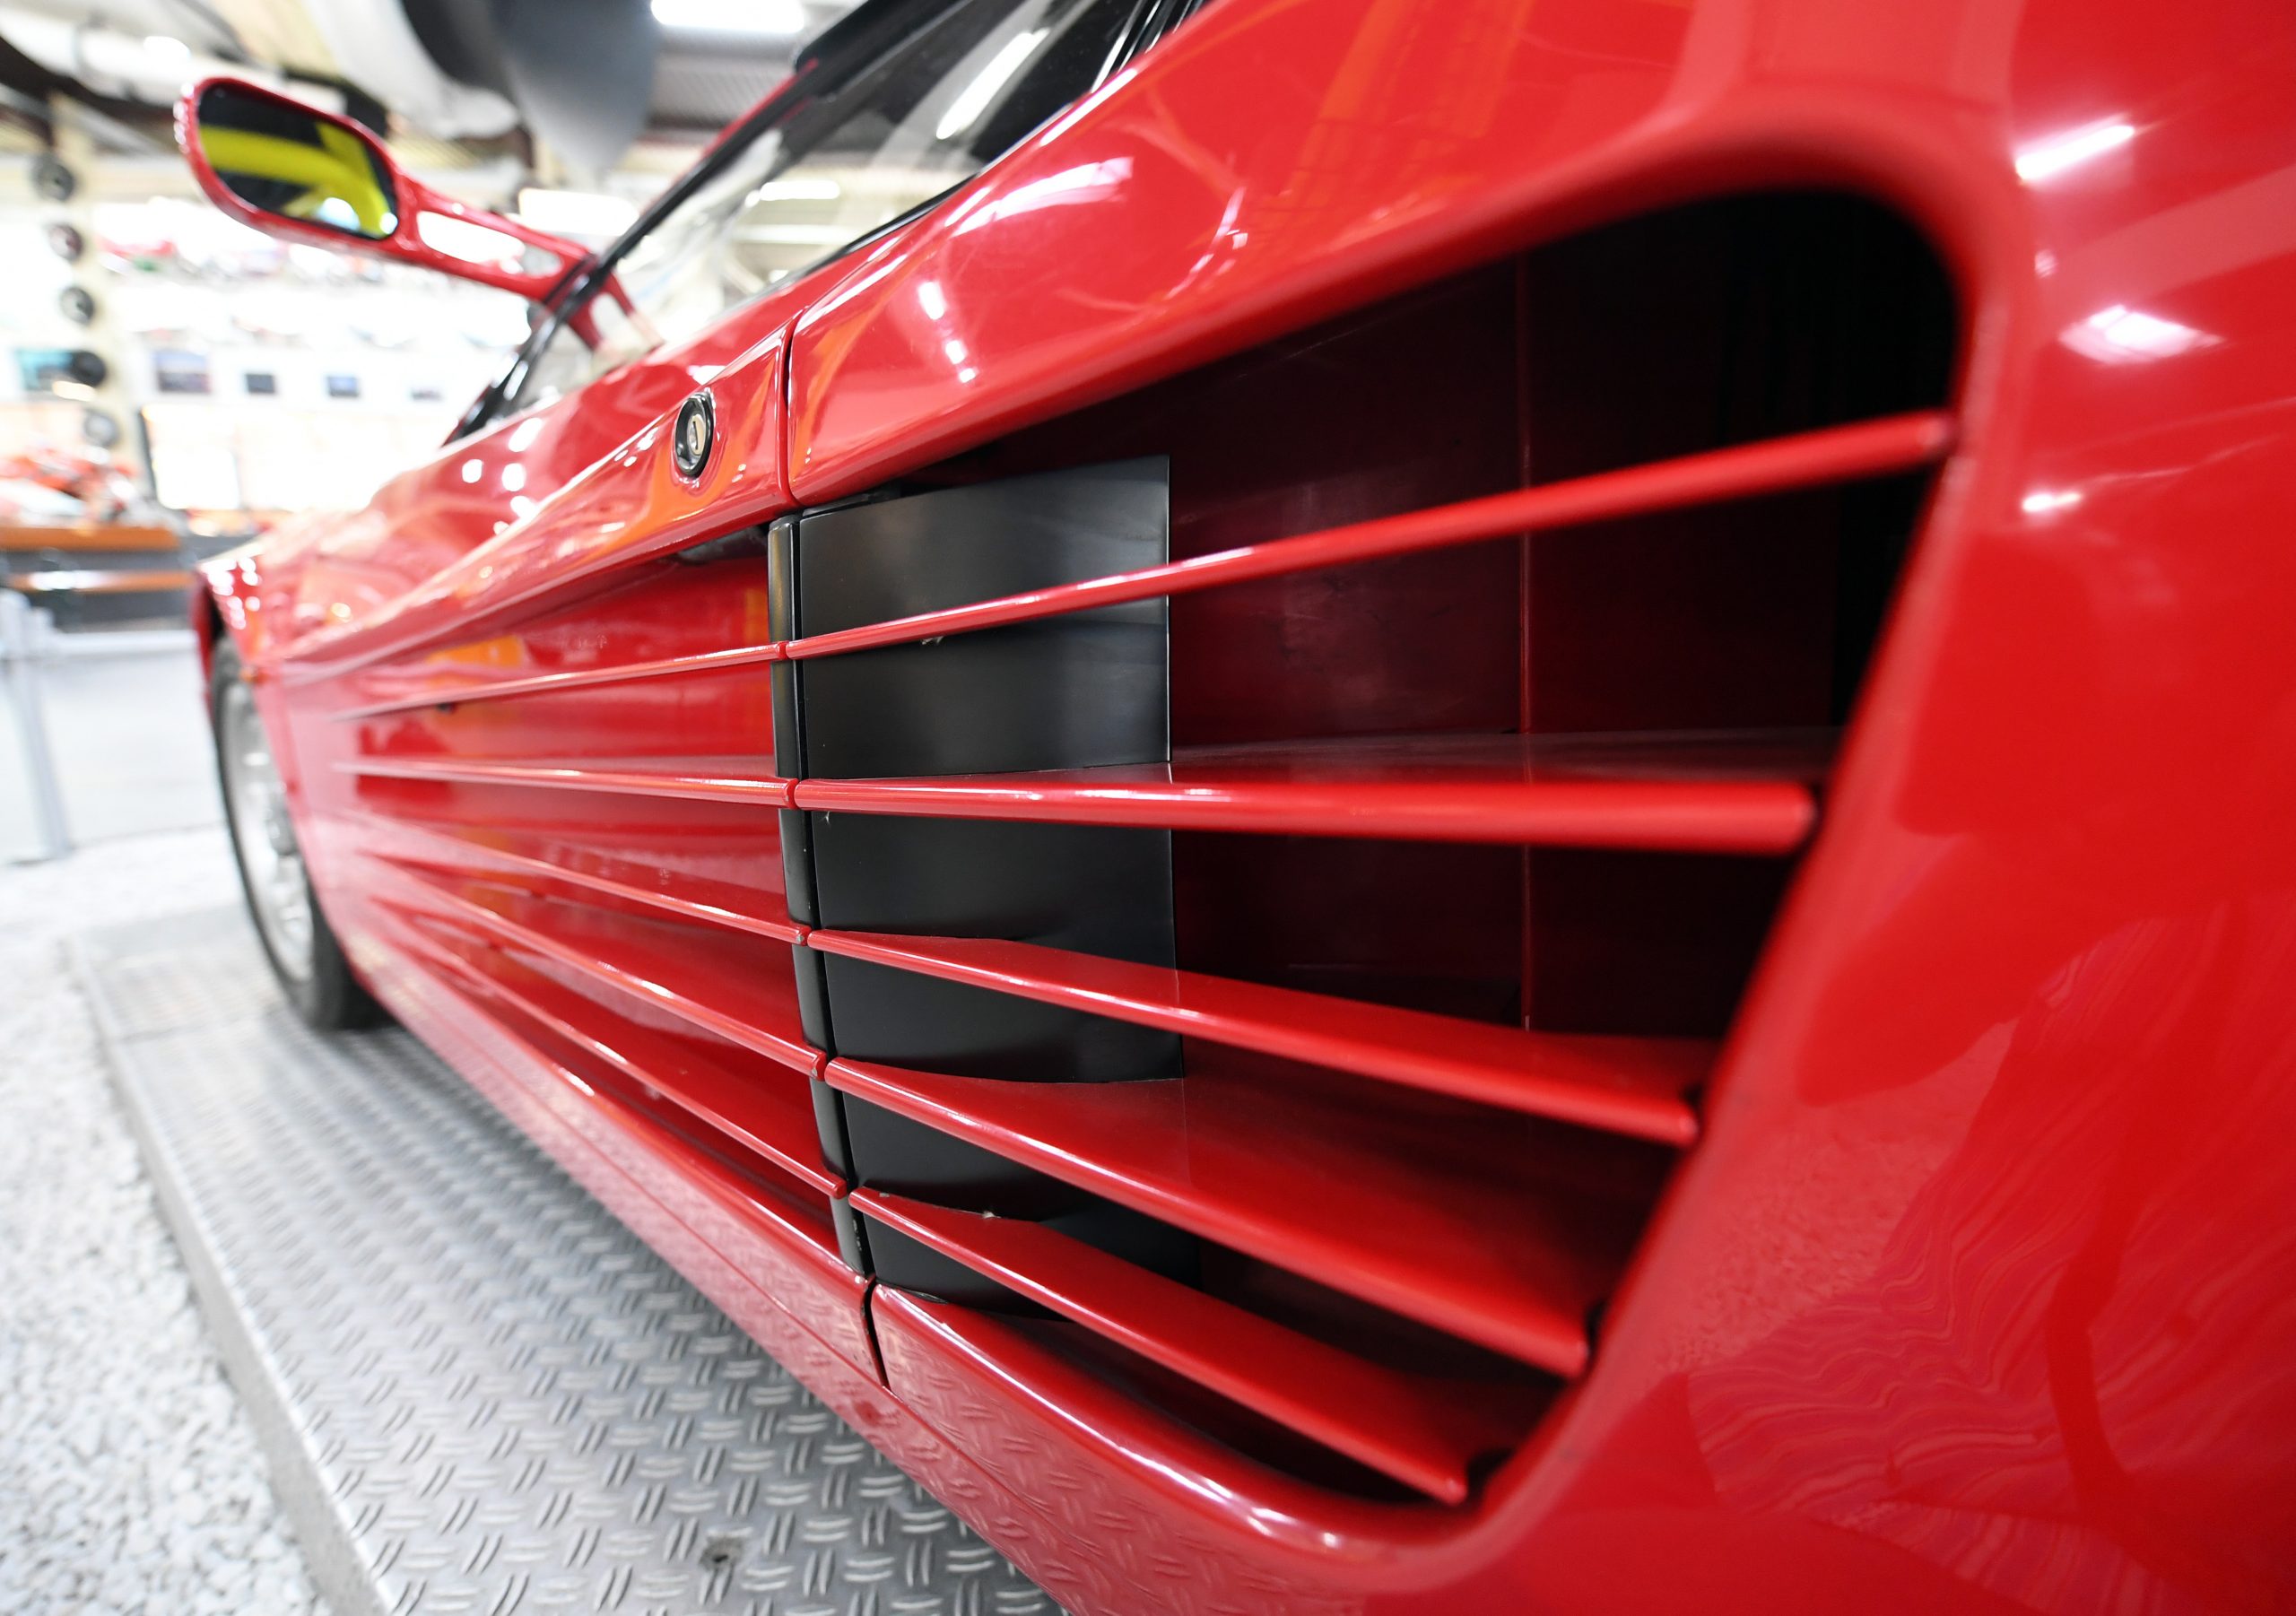 The drivers side door strakes leading to the air inlet for the engine or a red Ferrari Testarossa.